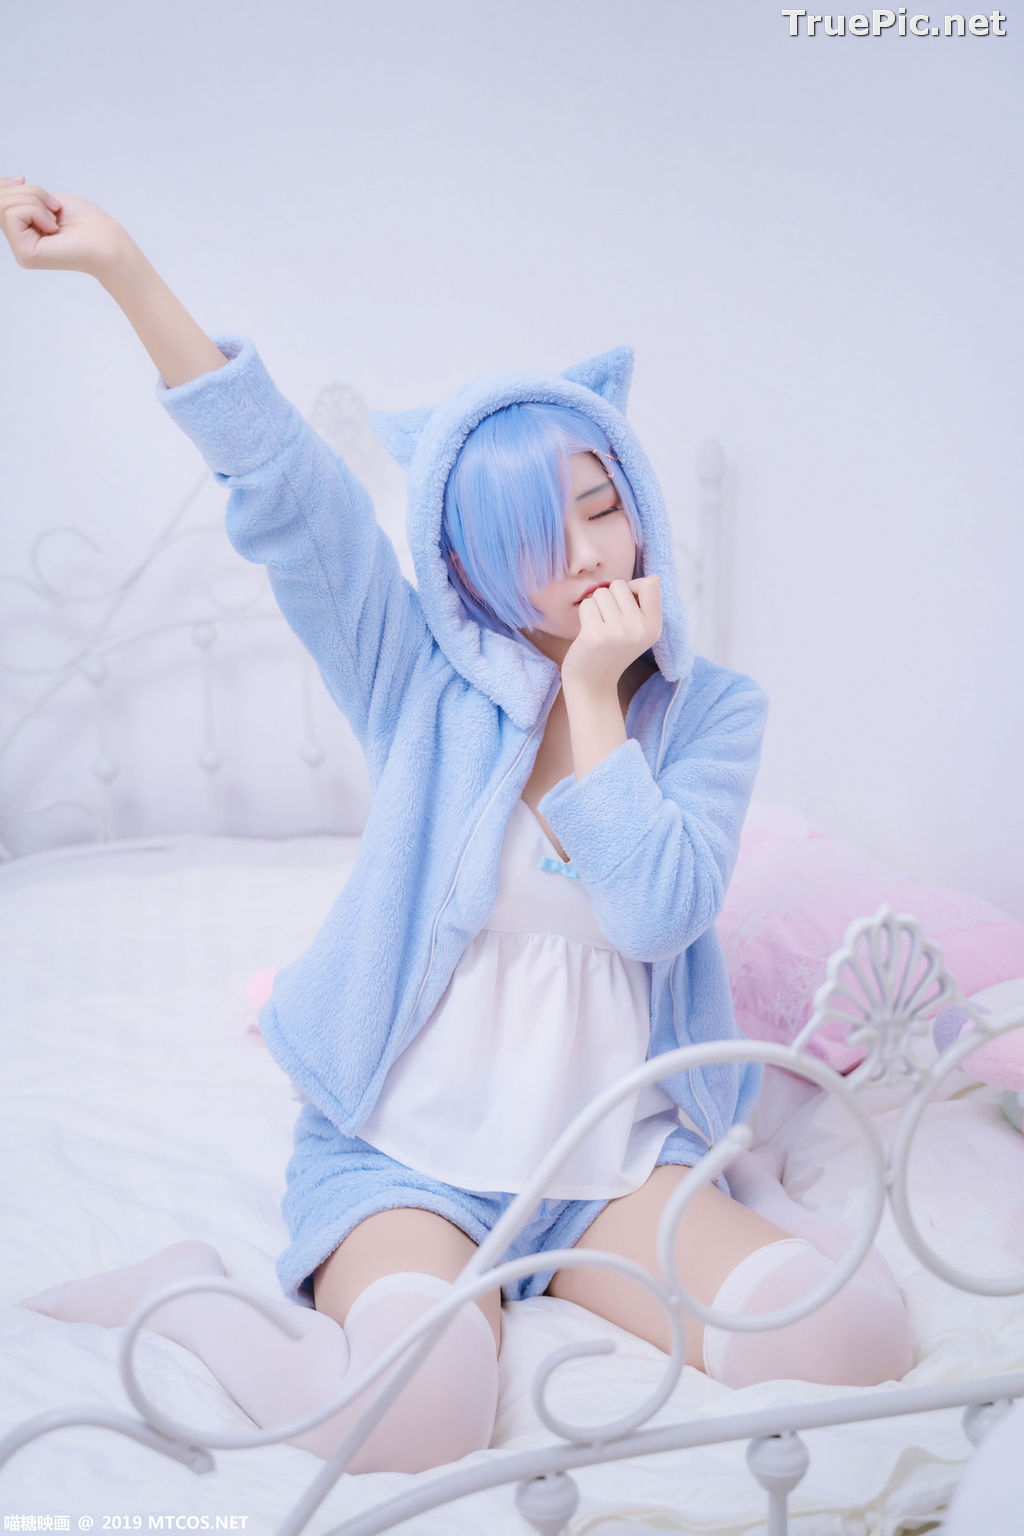 Image [MTCos] 喵糖映画 Vol.043 – Chinese Cute Model – Sexy Rem Cosplay - TruePic.net - Picture-28